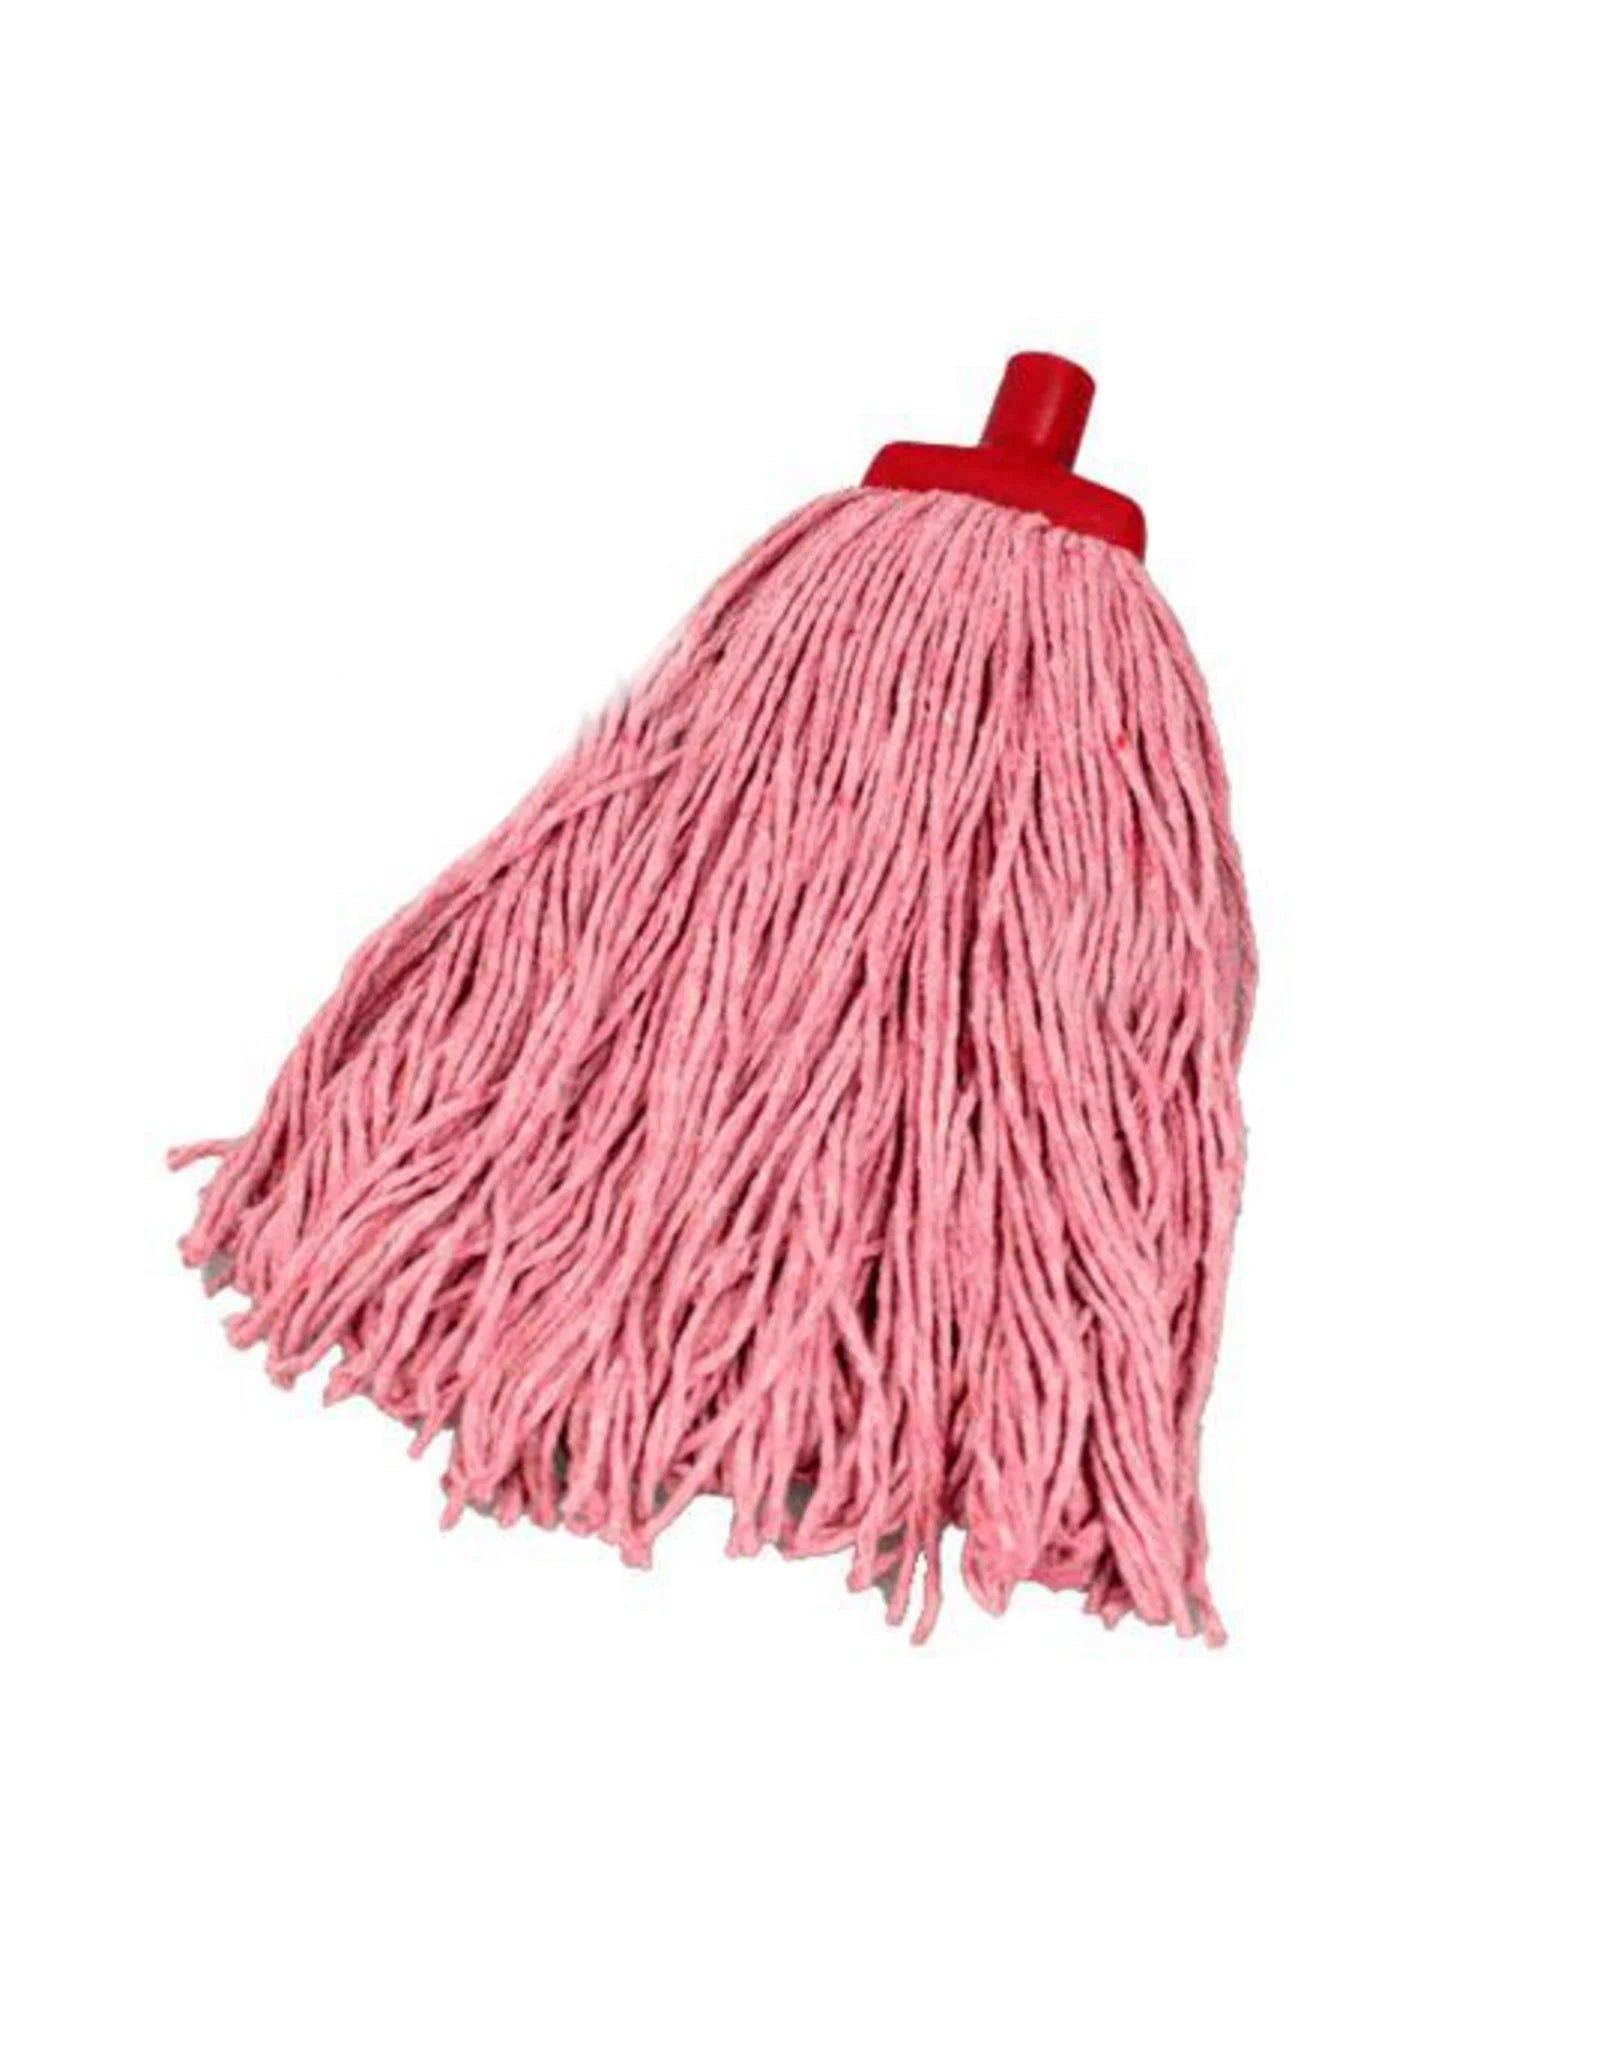 Red Commercial Cotton Mop Head 400g